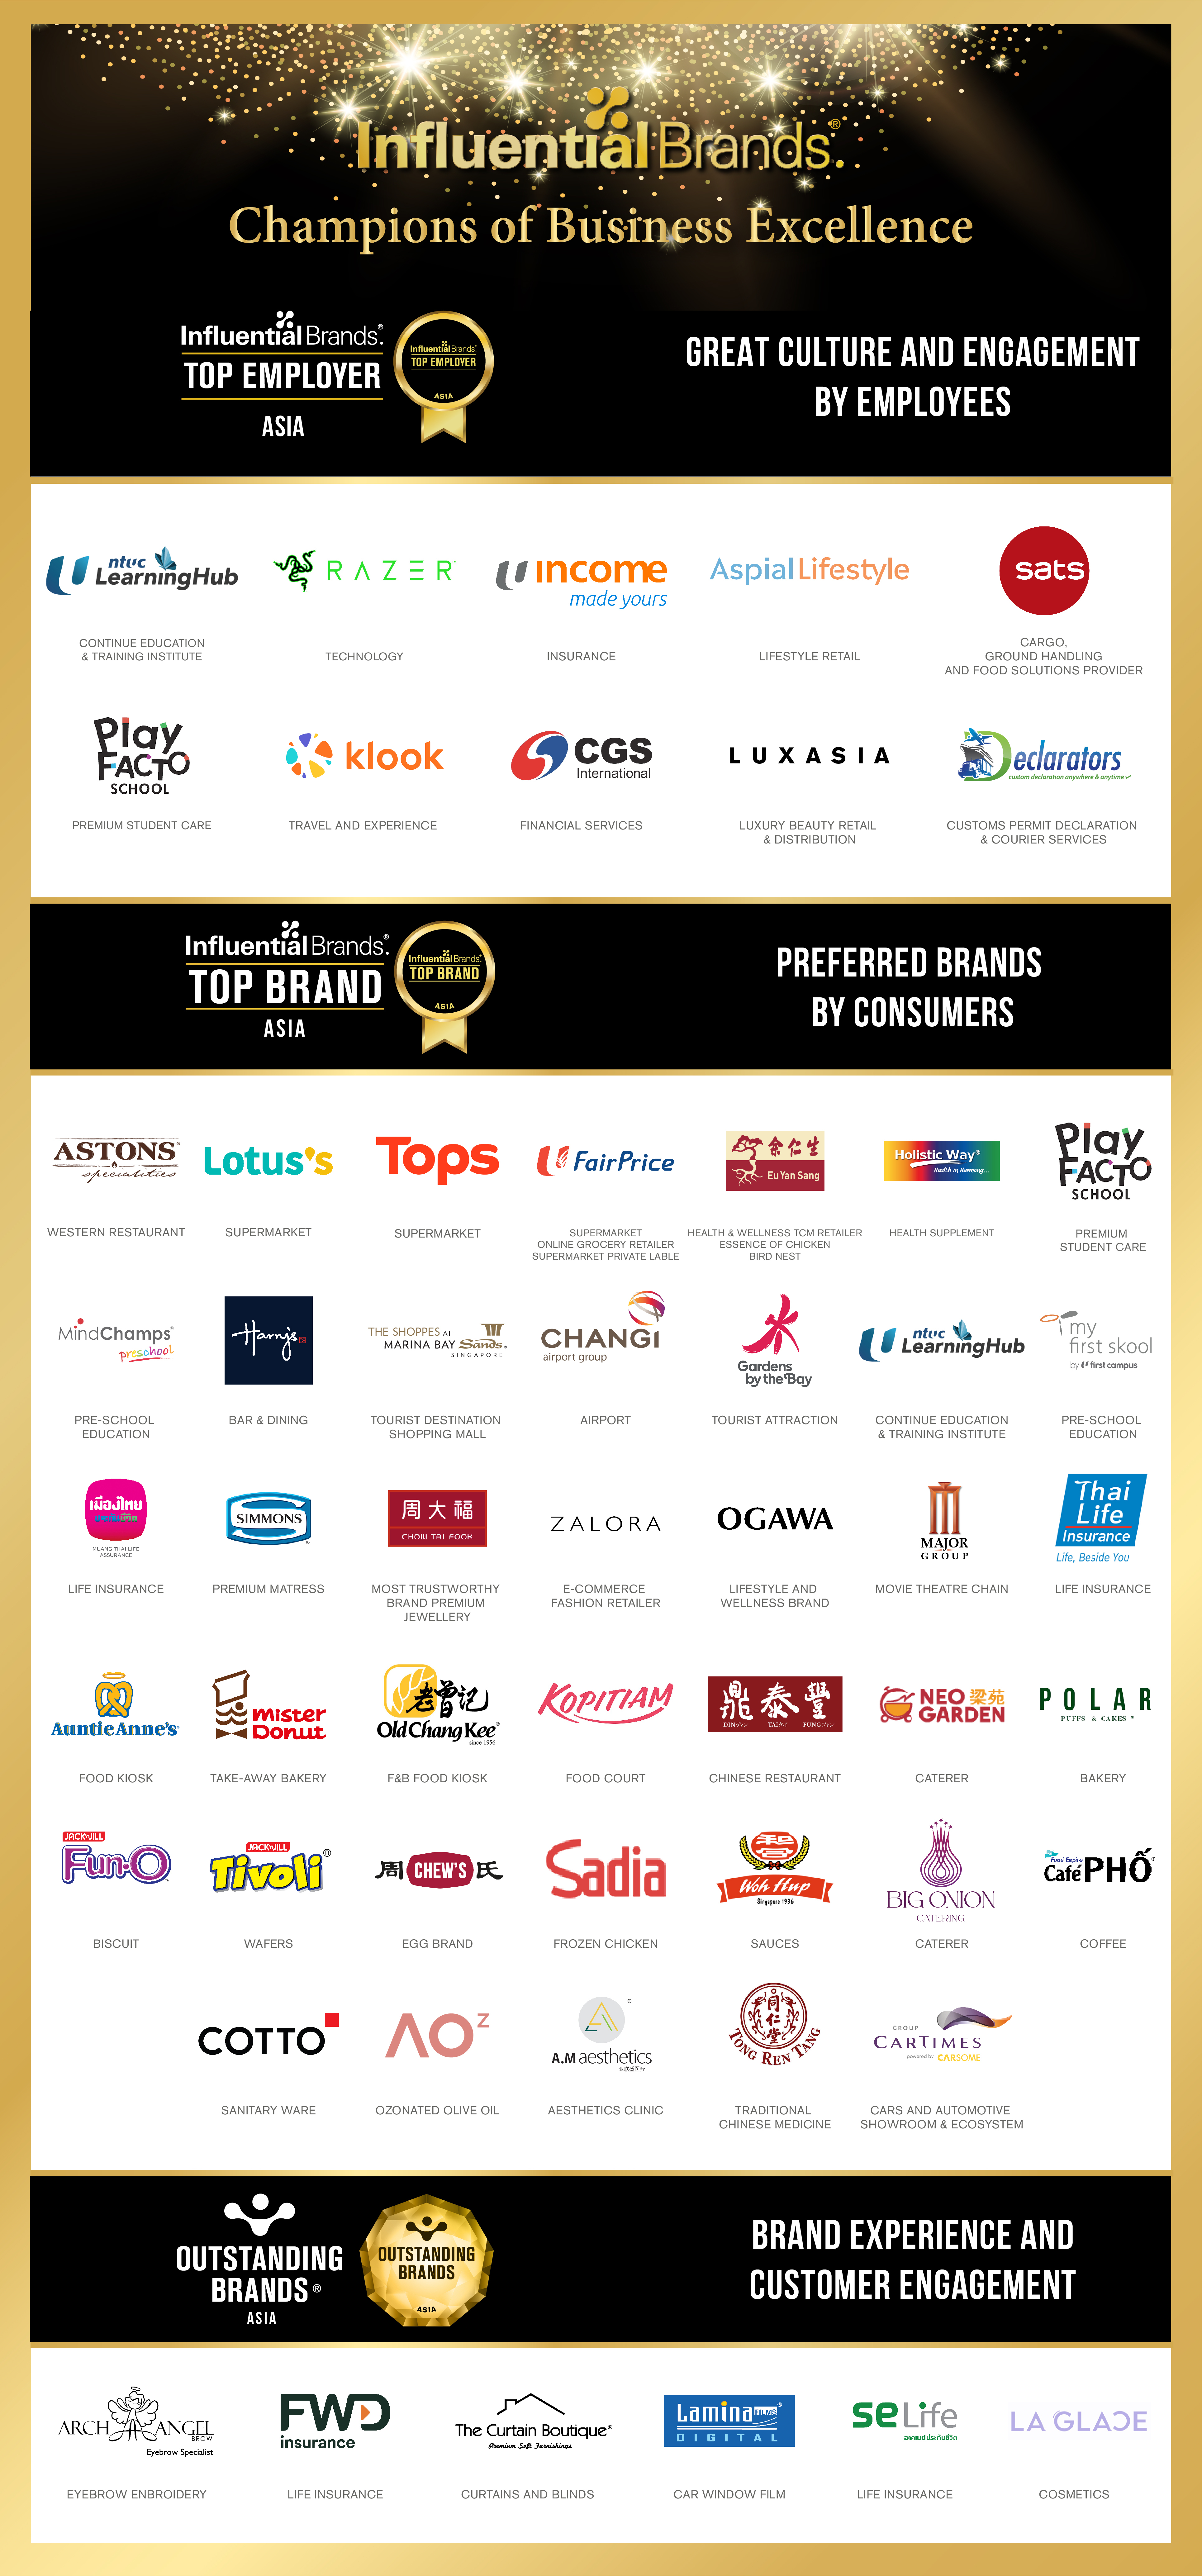 Top Employers, Top Brands and Outstanding Brands are conferred with the title of the Best in Class